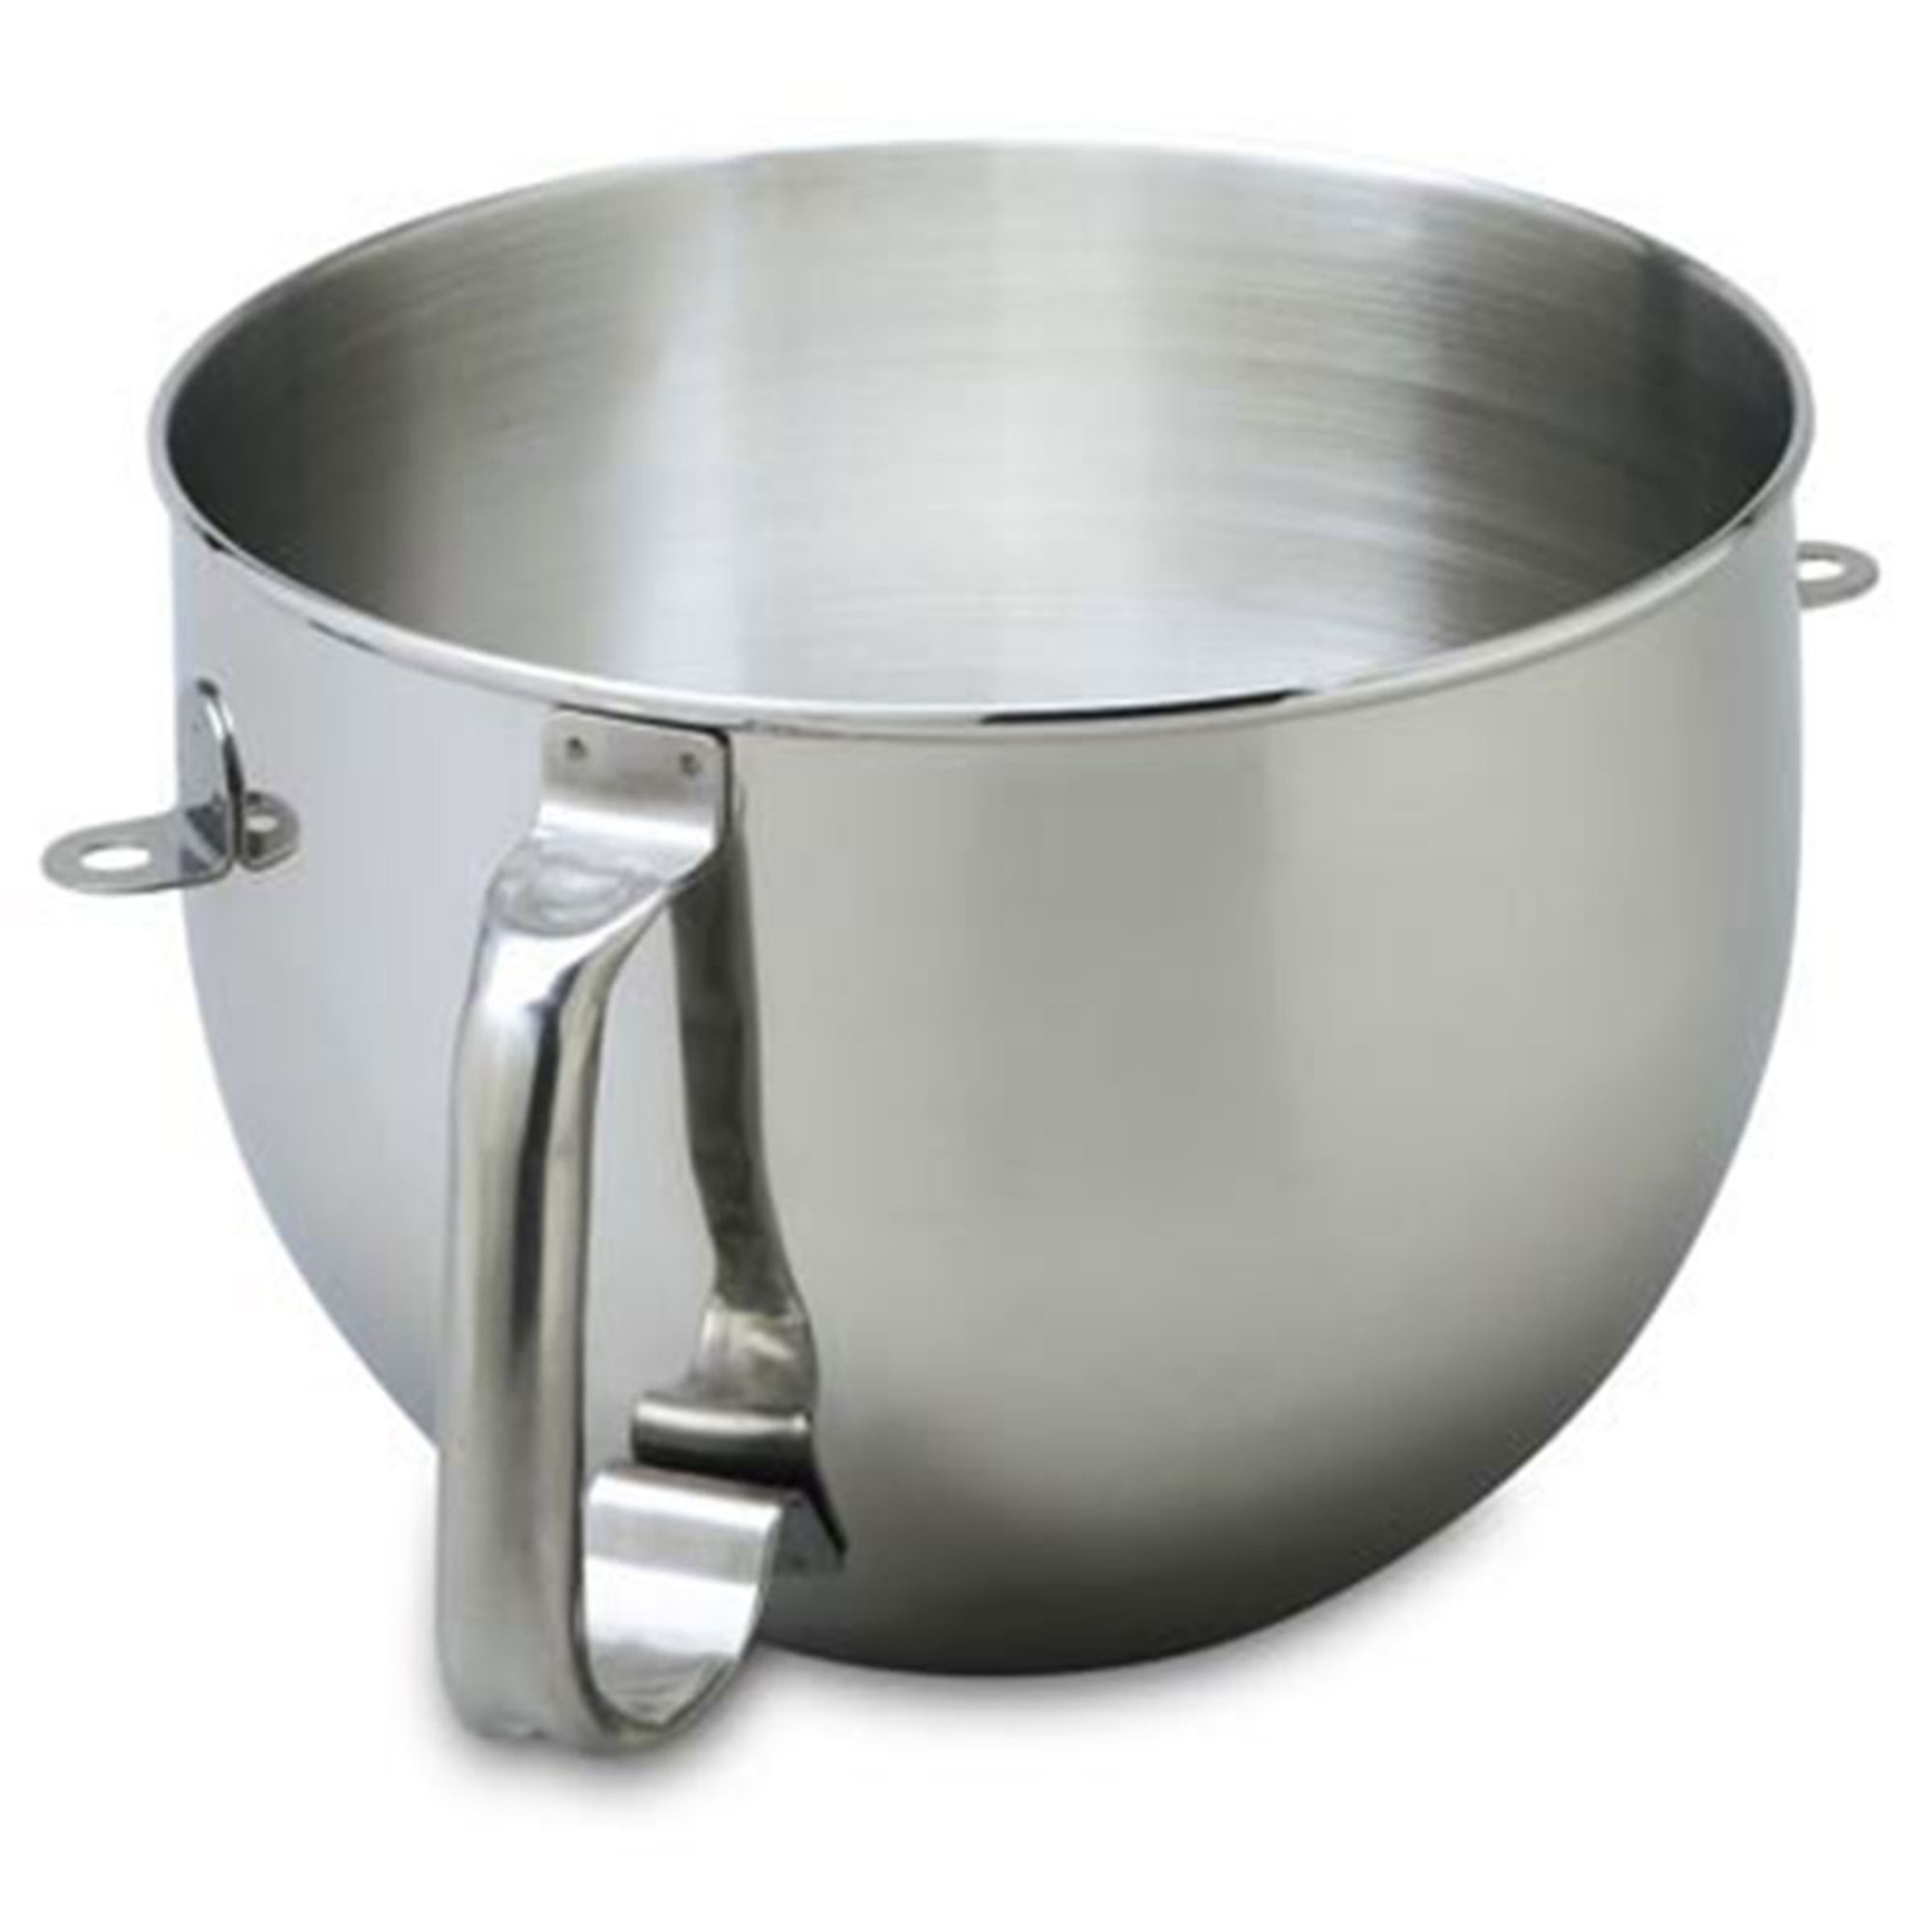 Kitchenaid 6-quart Stainless Steel Mixer Bowl With Handle For Bowl-lift